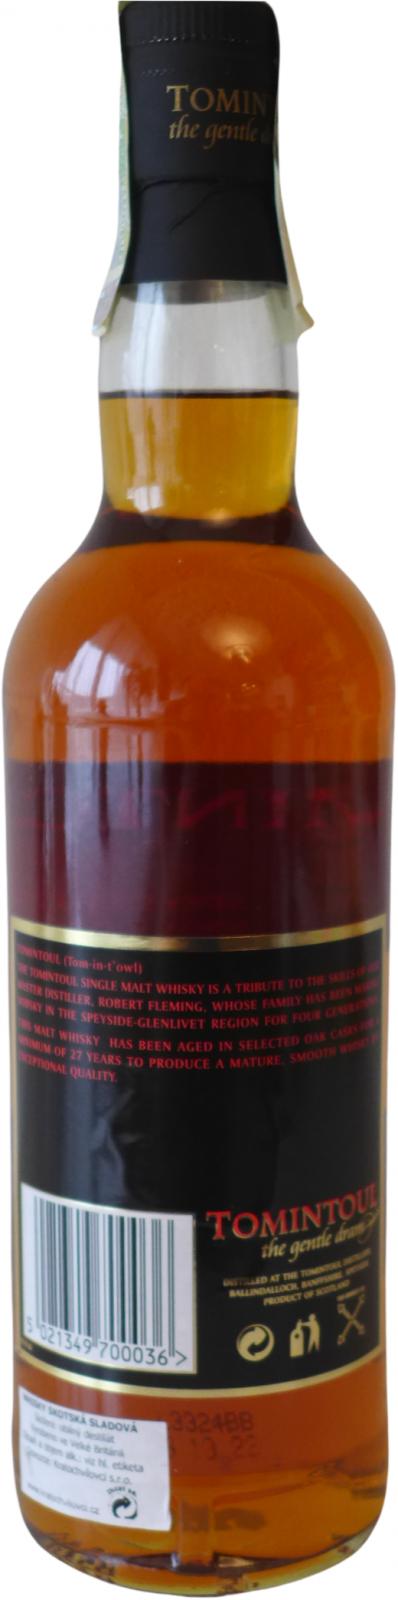 Tomintoul 27-year-old